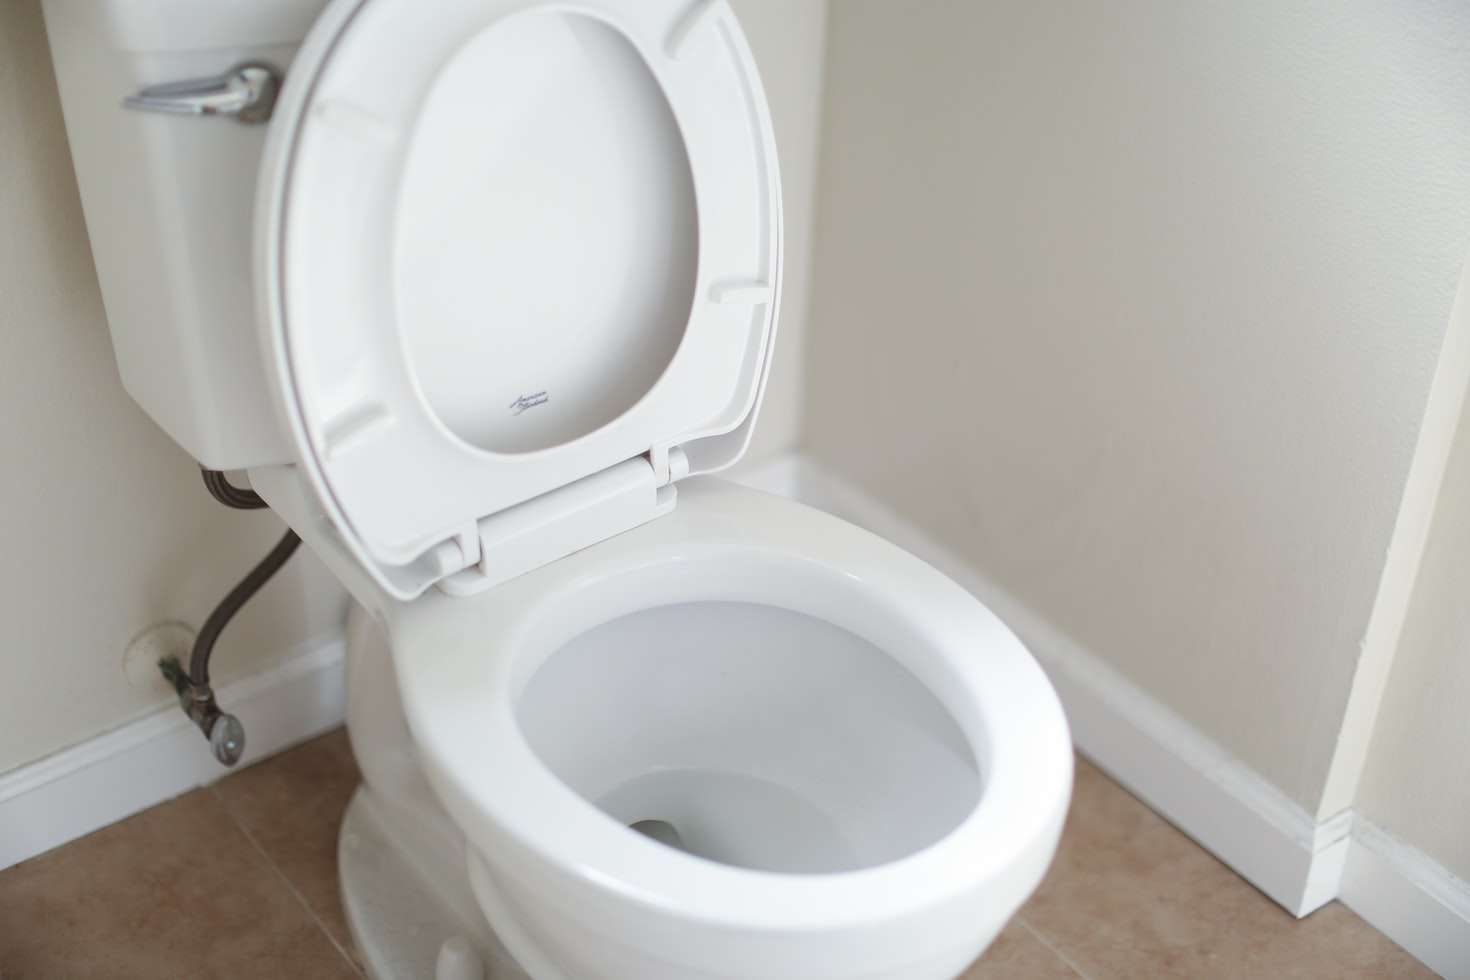 How to Install a Toilet Seat